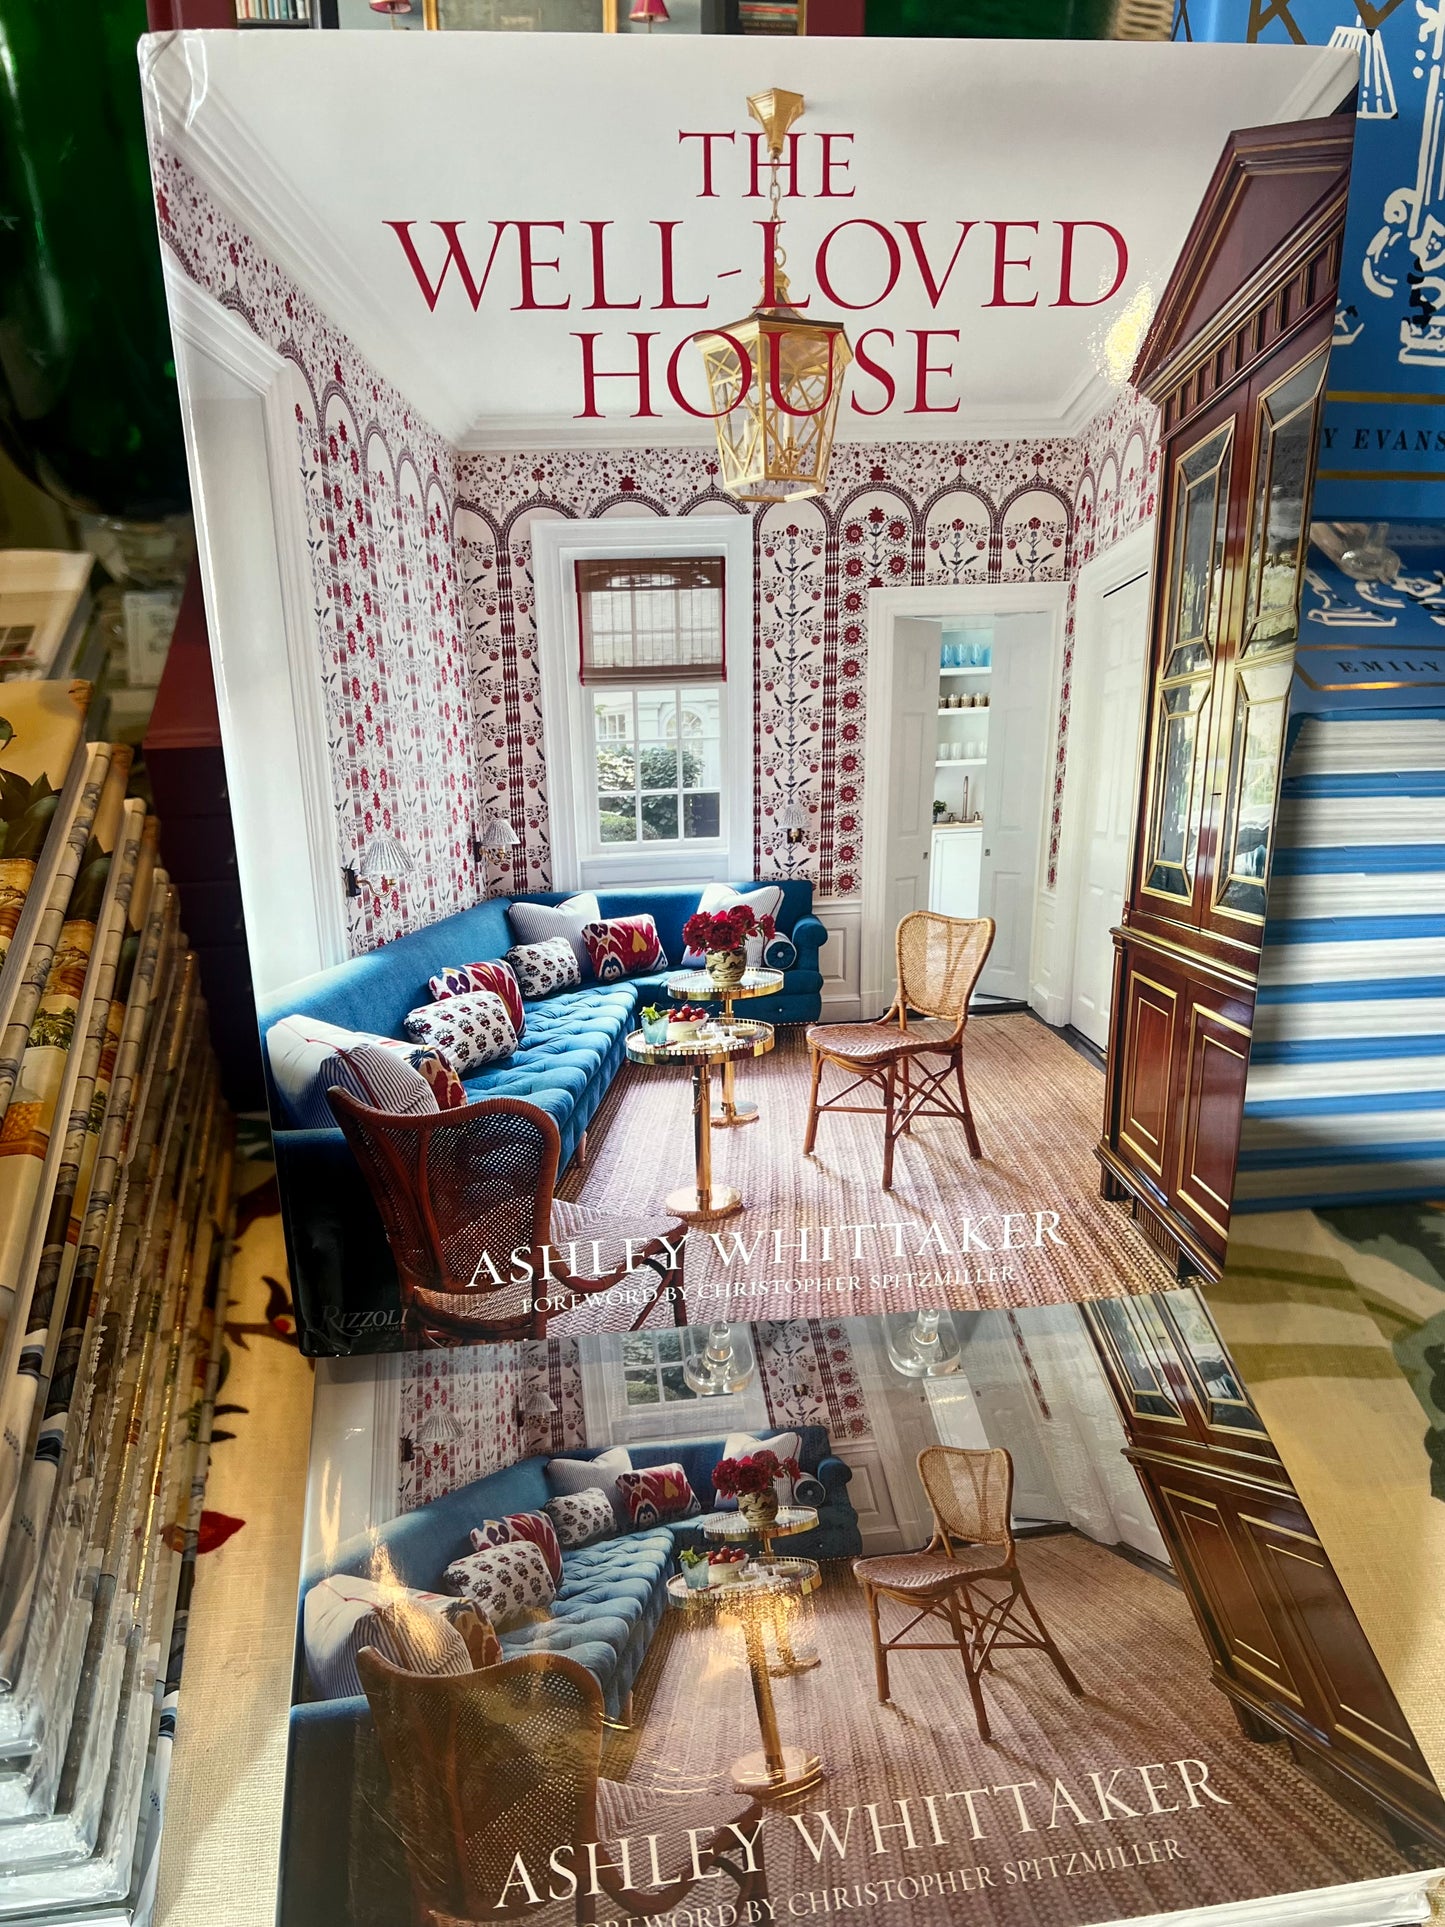 THE WELL-LOVED HOUSE - Ashley Whittaker (SIGNED COPY)